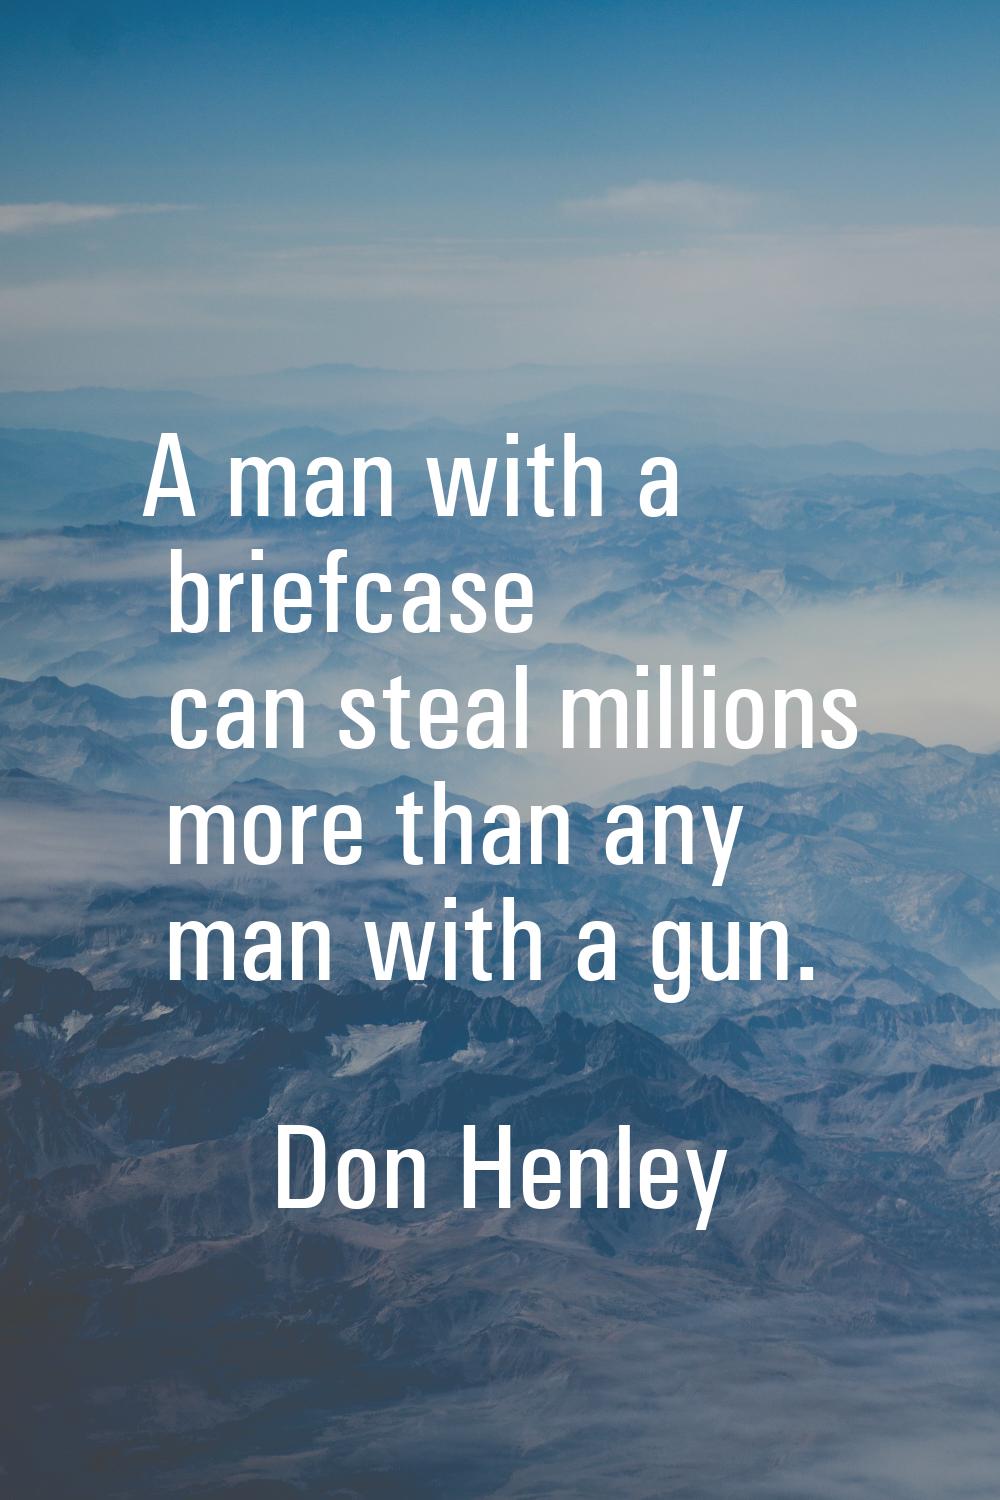 A man with a briefcase can steal millions more than any man with a gun.